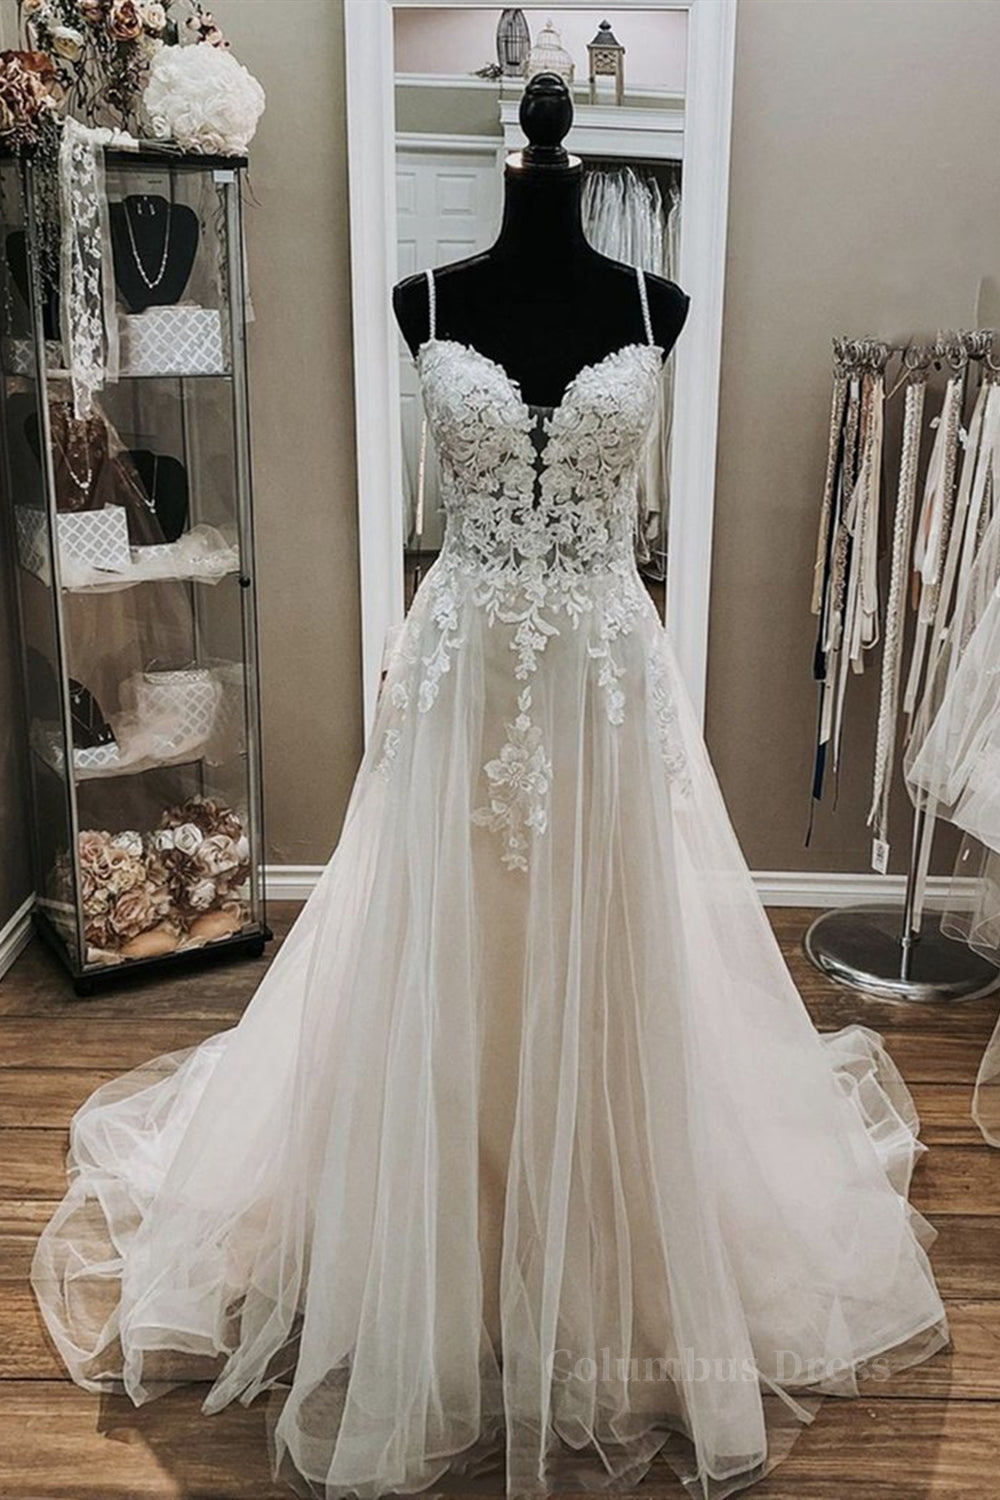 Wedding Dress Gowns, A Line V Neck White Lace Long Prom Wedding Dress, Thin Strap White Lace Formal Dress, White Lace Evening Dress